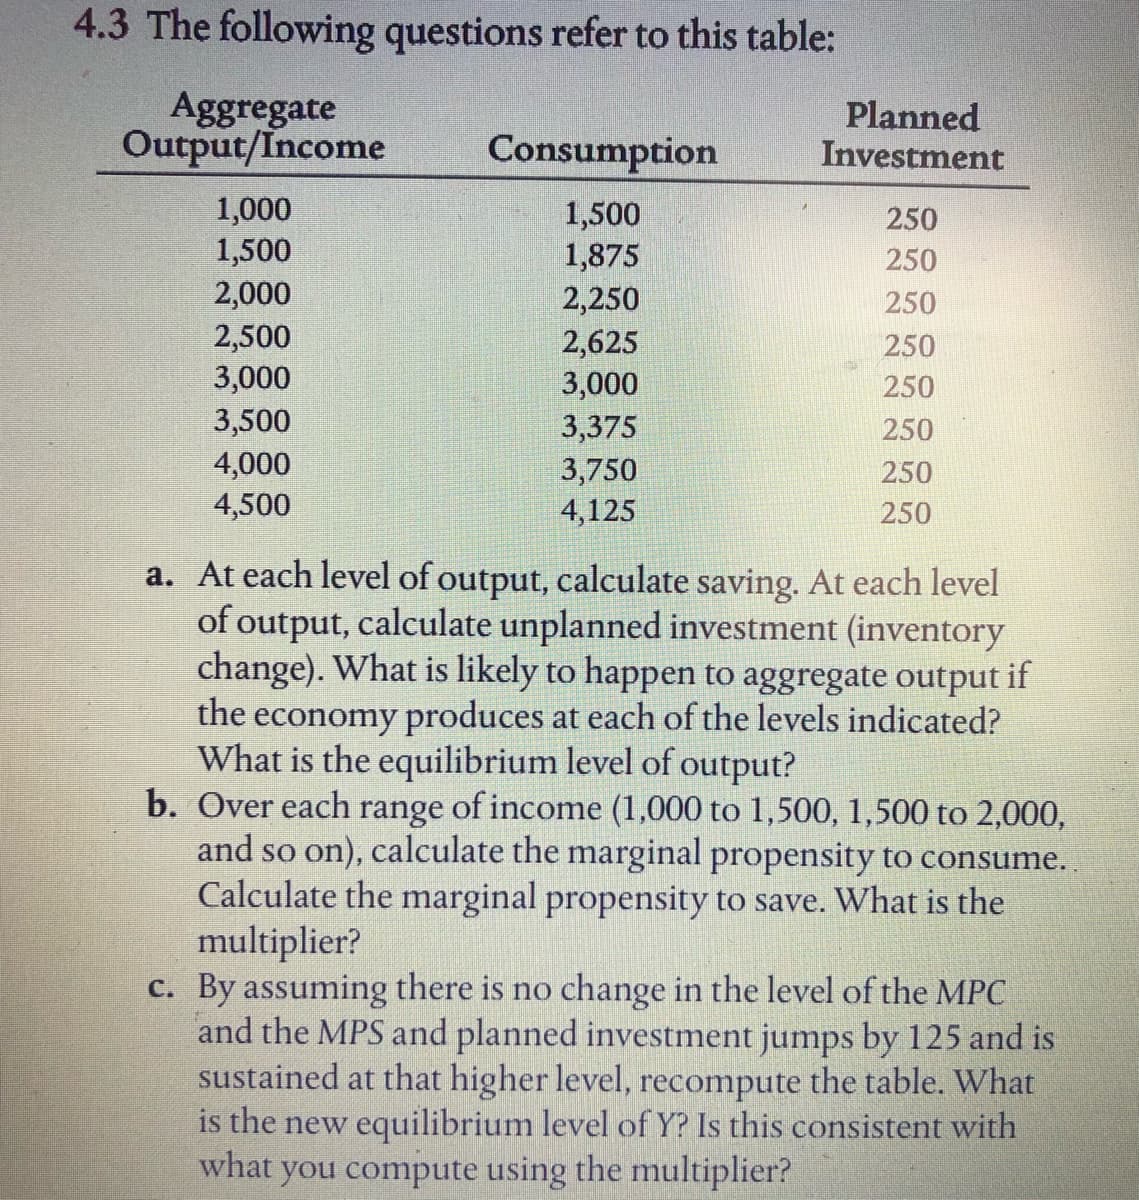 4.3 The following questions refer to this table:
Aggregate
Output/Income
Planned
Investment
Consumption
1,000
1,500
1,500
1,875
2,250
250
250
2,000
2,500
3,000
250
2,625
3,000
250
250
3,500
3,375
250
4,000
4,500
3,750
4,125
250
250
a. At each level of output, calculate saving. At each level
of output, calculate unplanned investment (inventory
change). What is likely to happen to aggregate output if
the
economy produces at each of the levels indicated?
What is the equilibrium level of output?
b. Over each range of income (1,000 to 1,500, 1,500 to 2,000,
and so on), calculate the marginal propensity to consume.
Calculate the marginal propensity to save. What is the
multiplier?
c. By assuming there is no change in the level of the MPC
and the MPS and planned investment jumps by 125 and is
sustained at that higher level, recompute the table. What
is the new equilibrium level of Y? Is this consistent with
what you compute using the multiplier?
